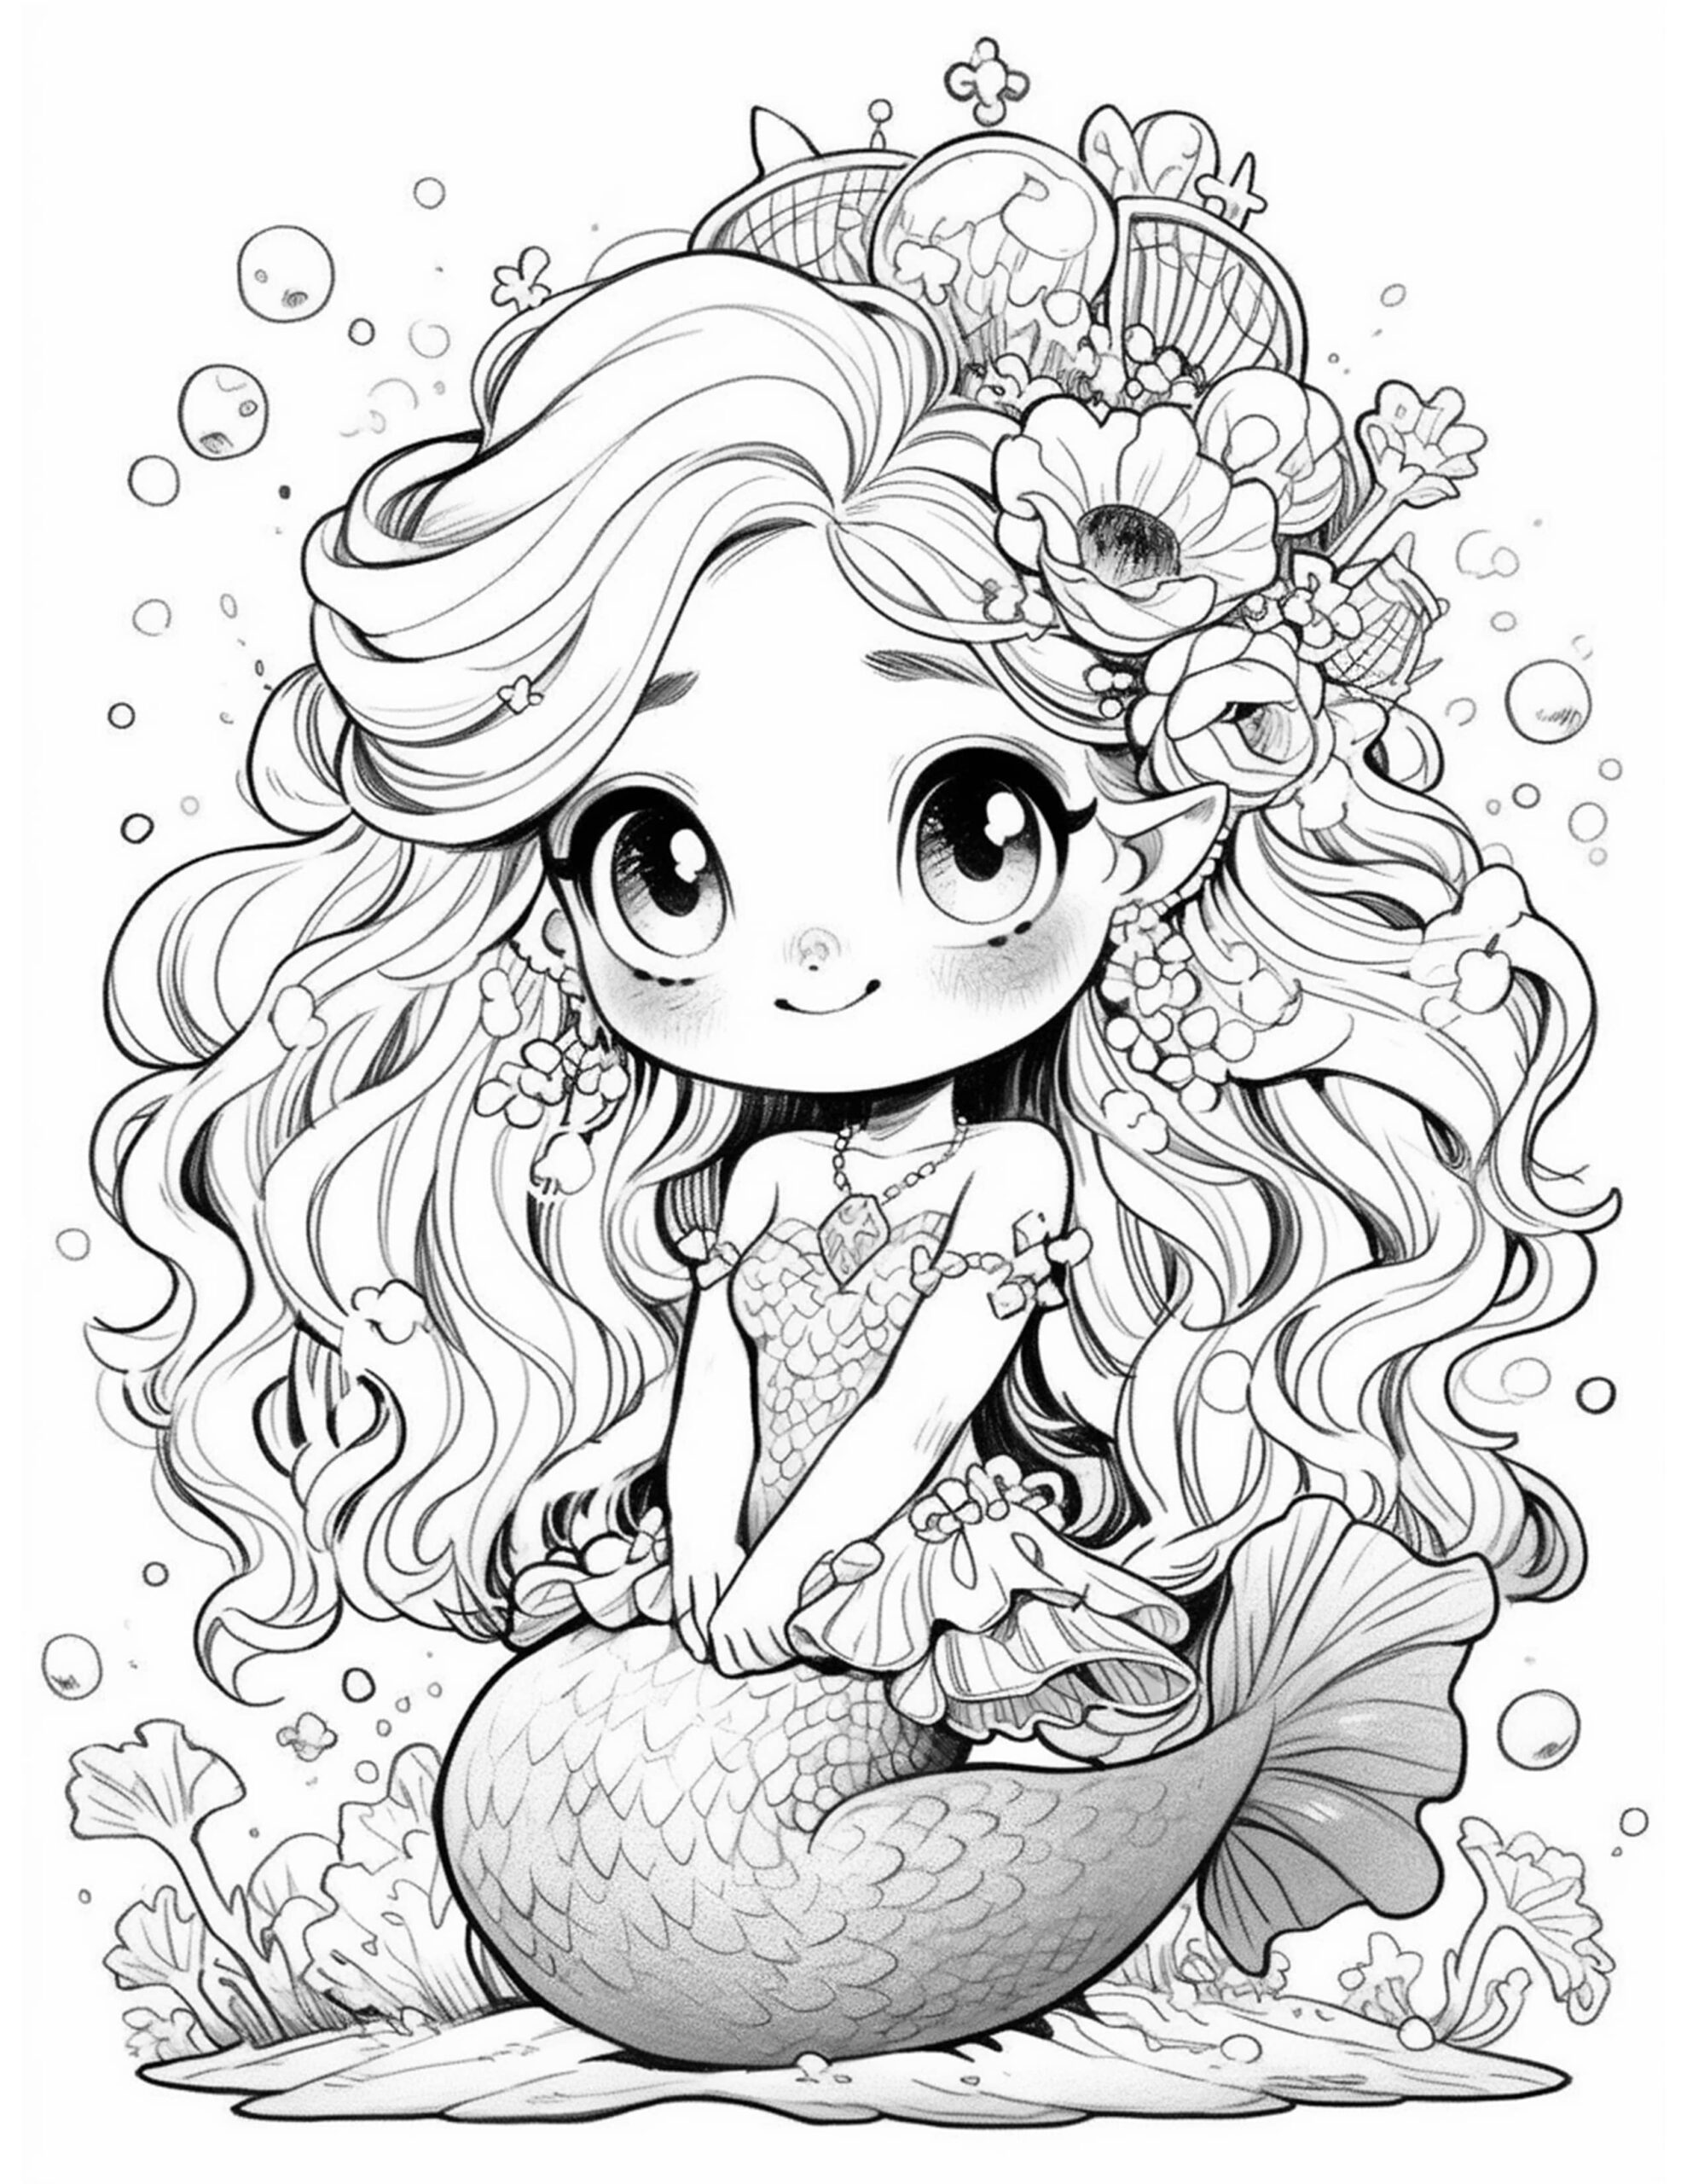 Mermaid Coloring Pages - The Poppy Jar